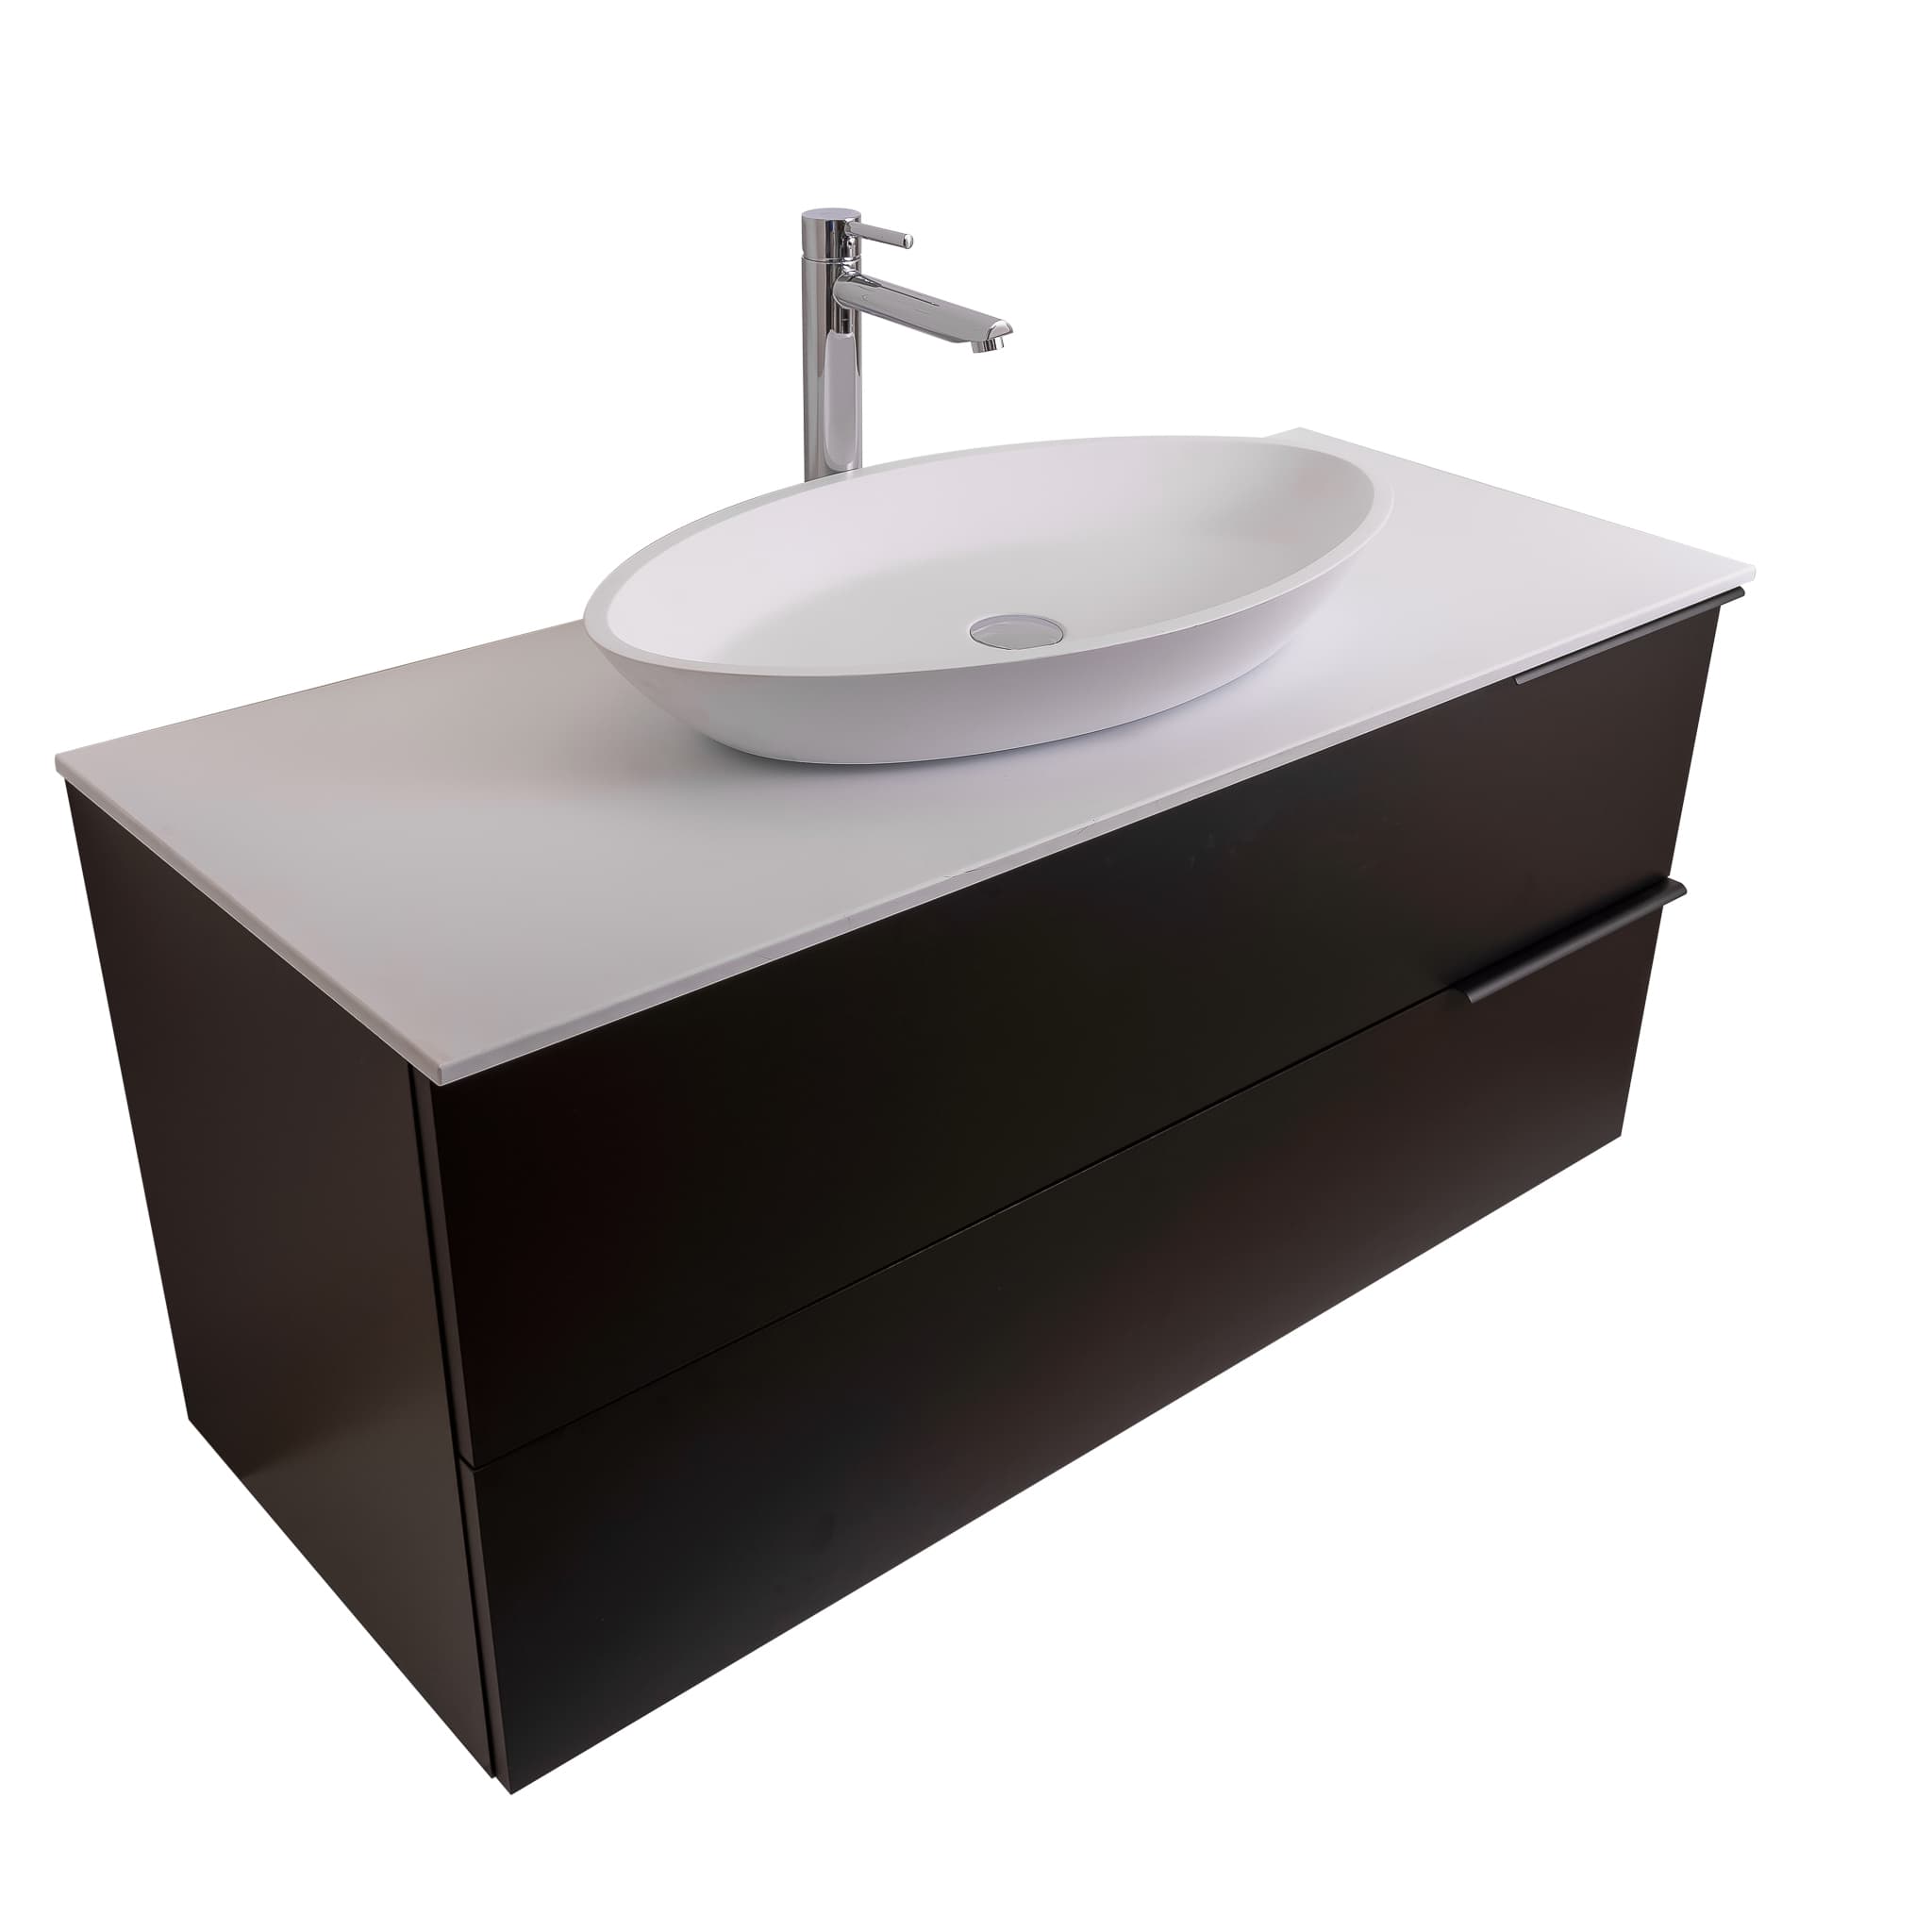 Mallorca 47.5 Matte Black Cabinet, Solid Surface Flat White Counter And Oval Solid Surface White Basin 1305, Wall Mounted Modern Vanity Set